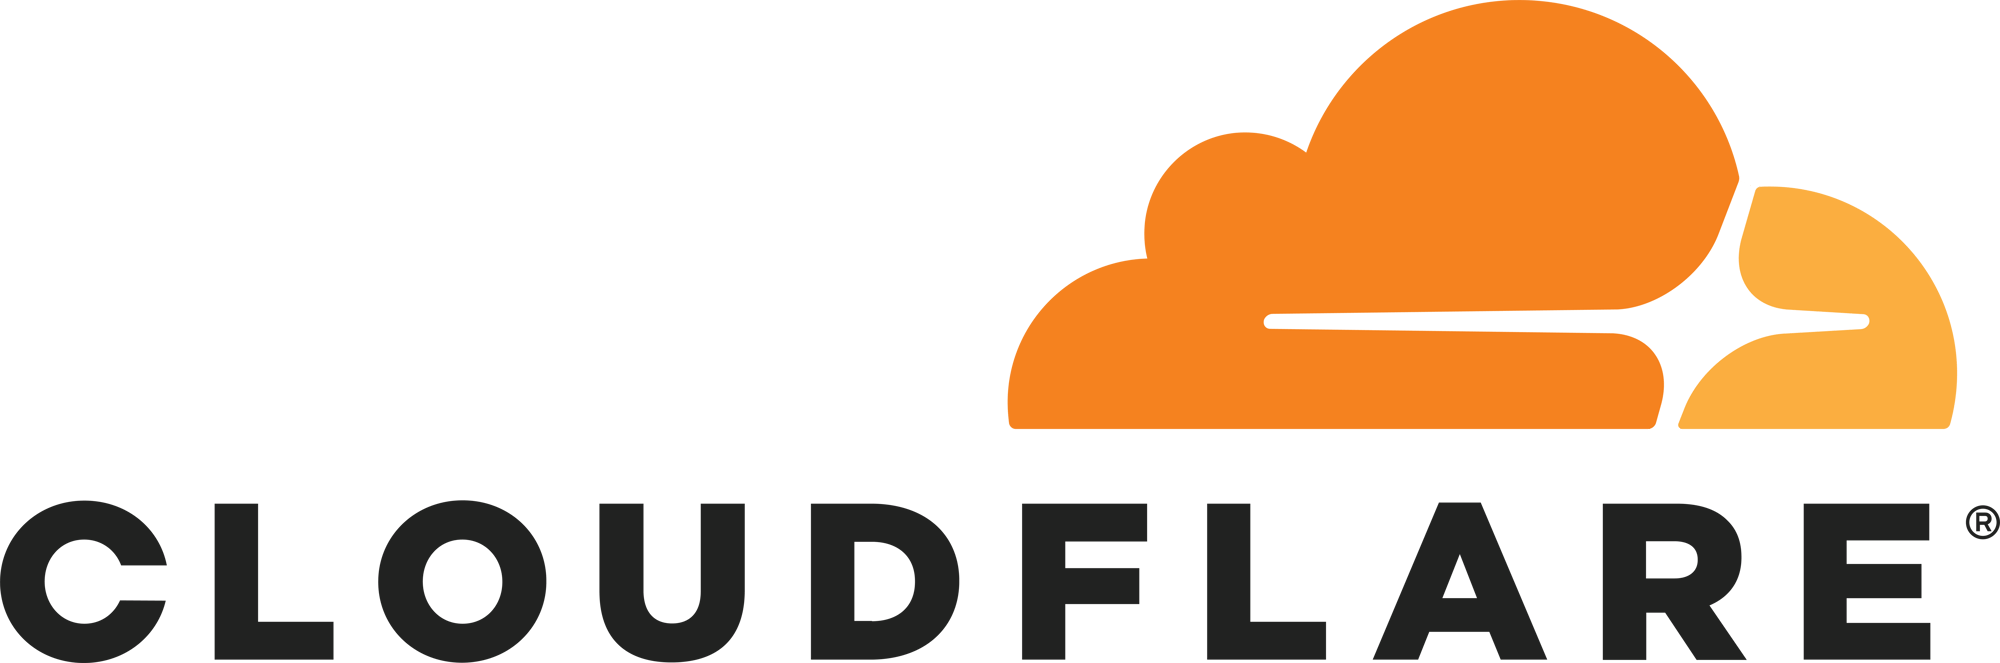 Cloudflare at 1000mm